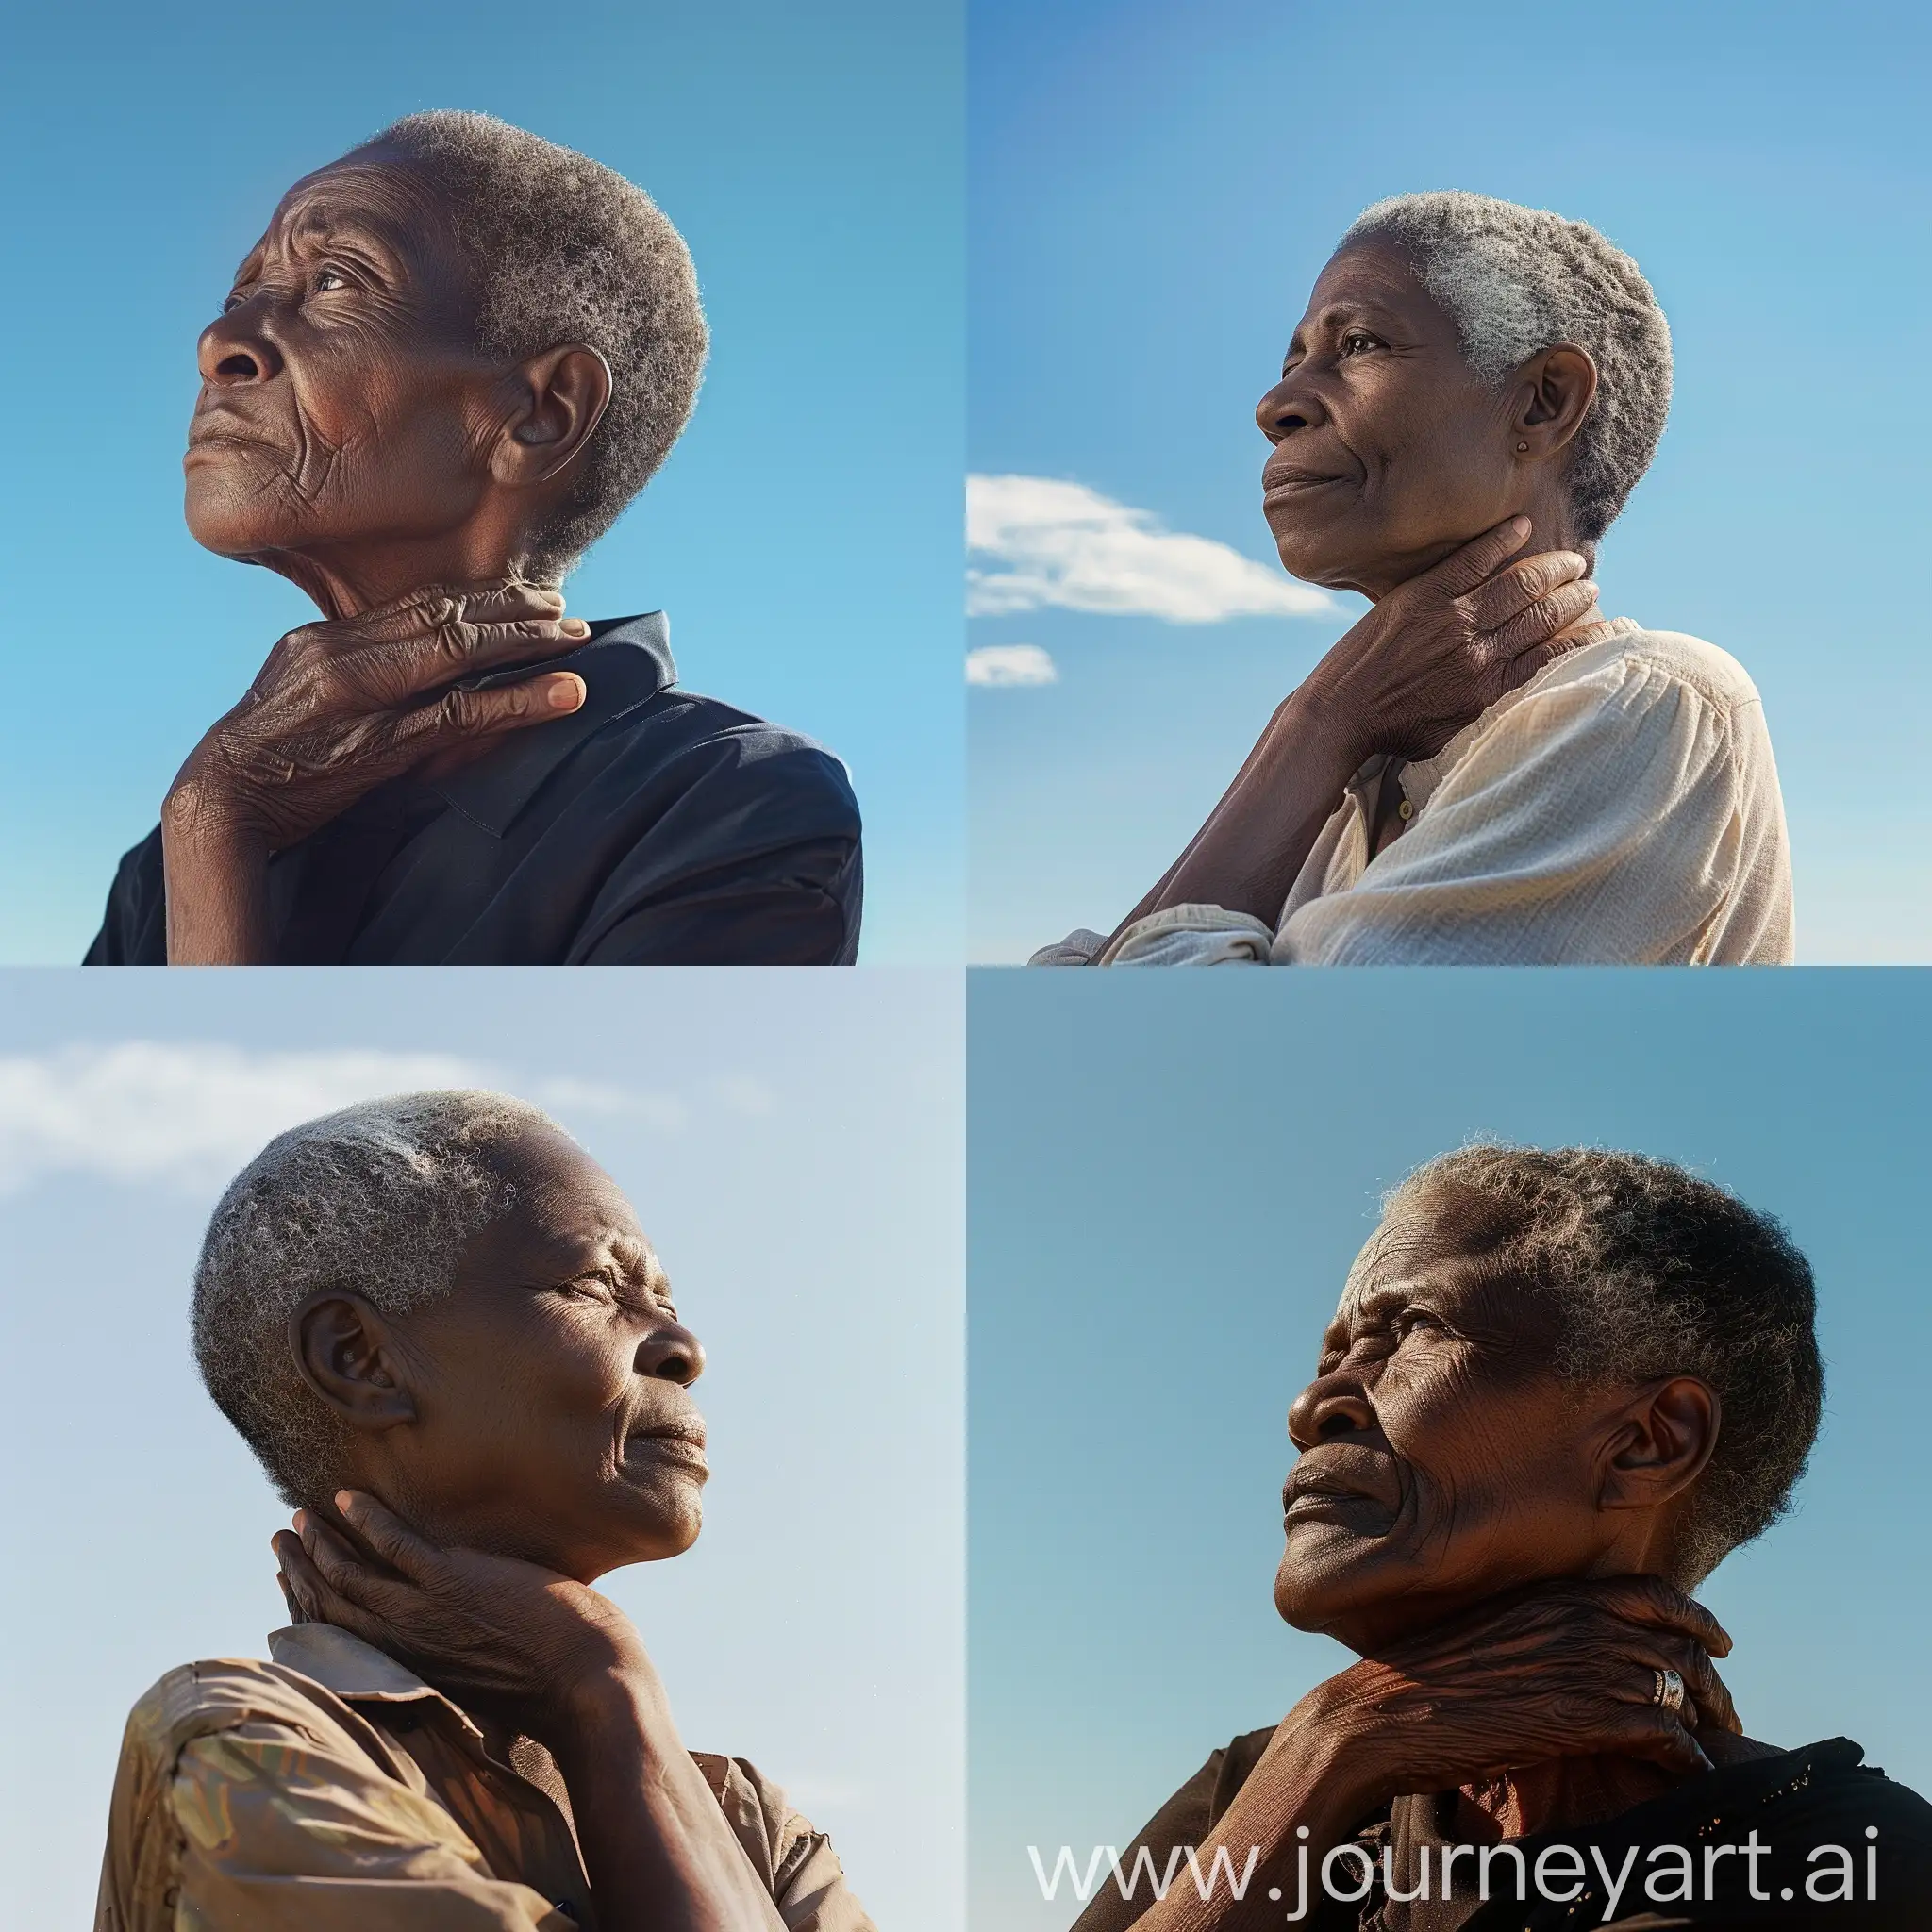 Elegant-68YearOld-African-Woman-in-Side-Profile-with-Reflective-Expression-on-a-Sunny-Day